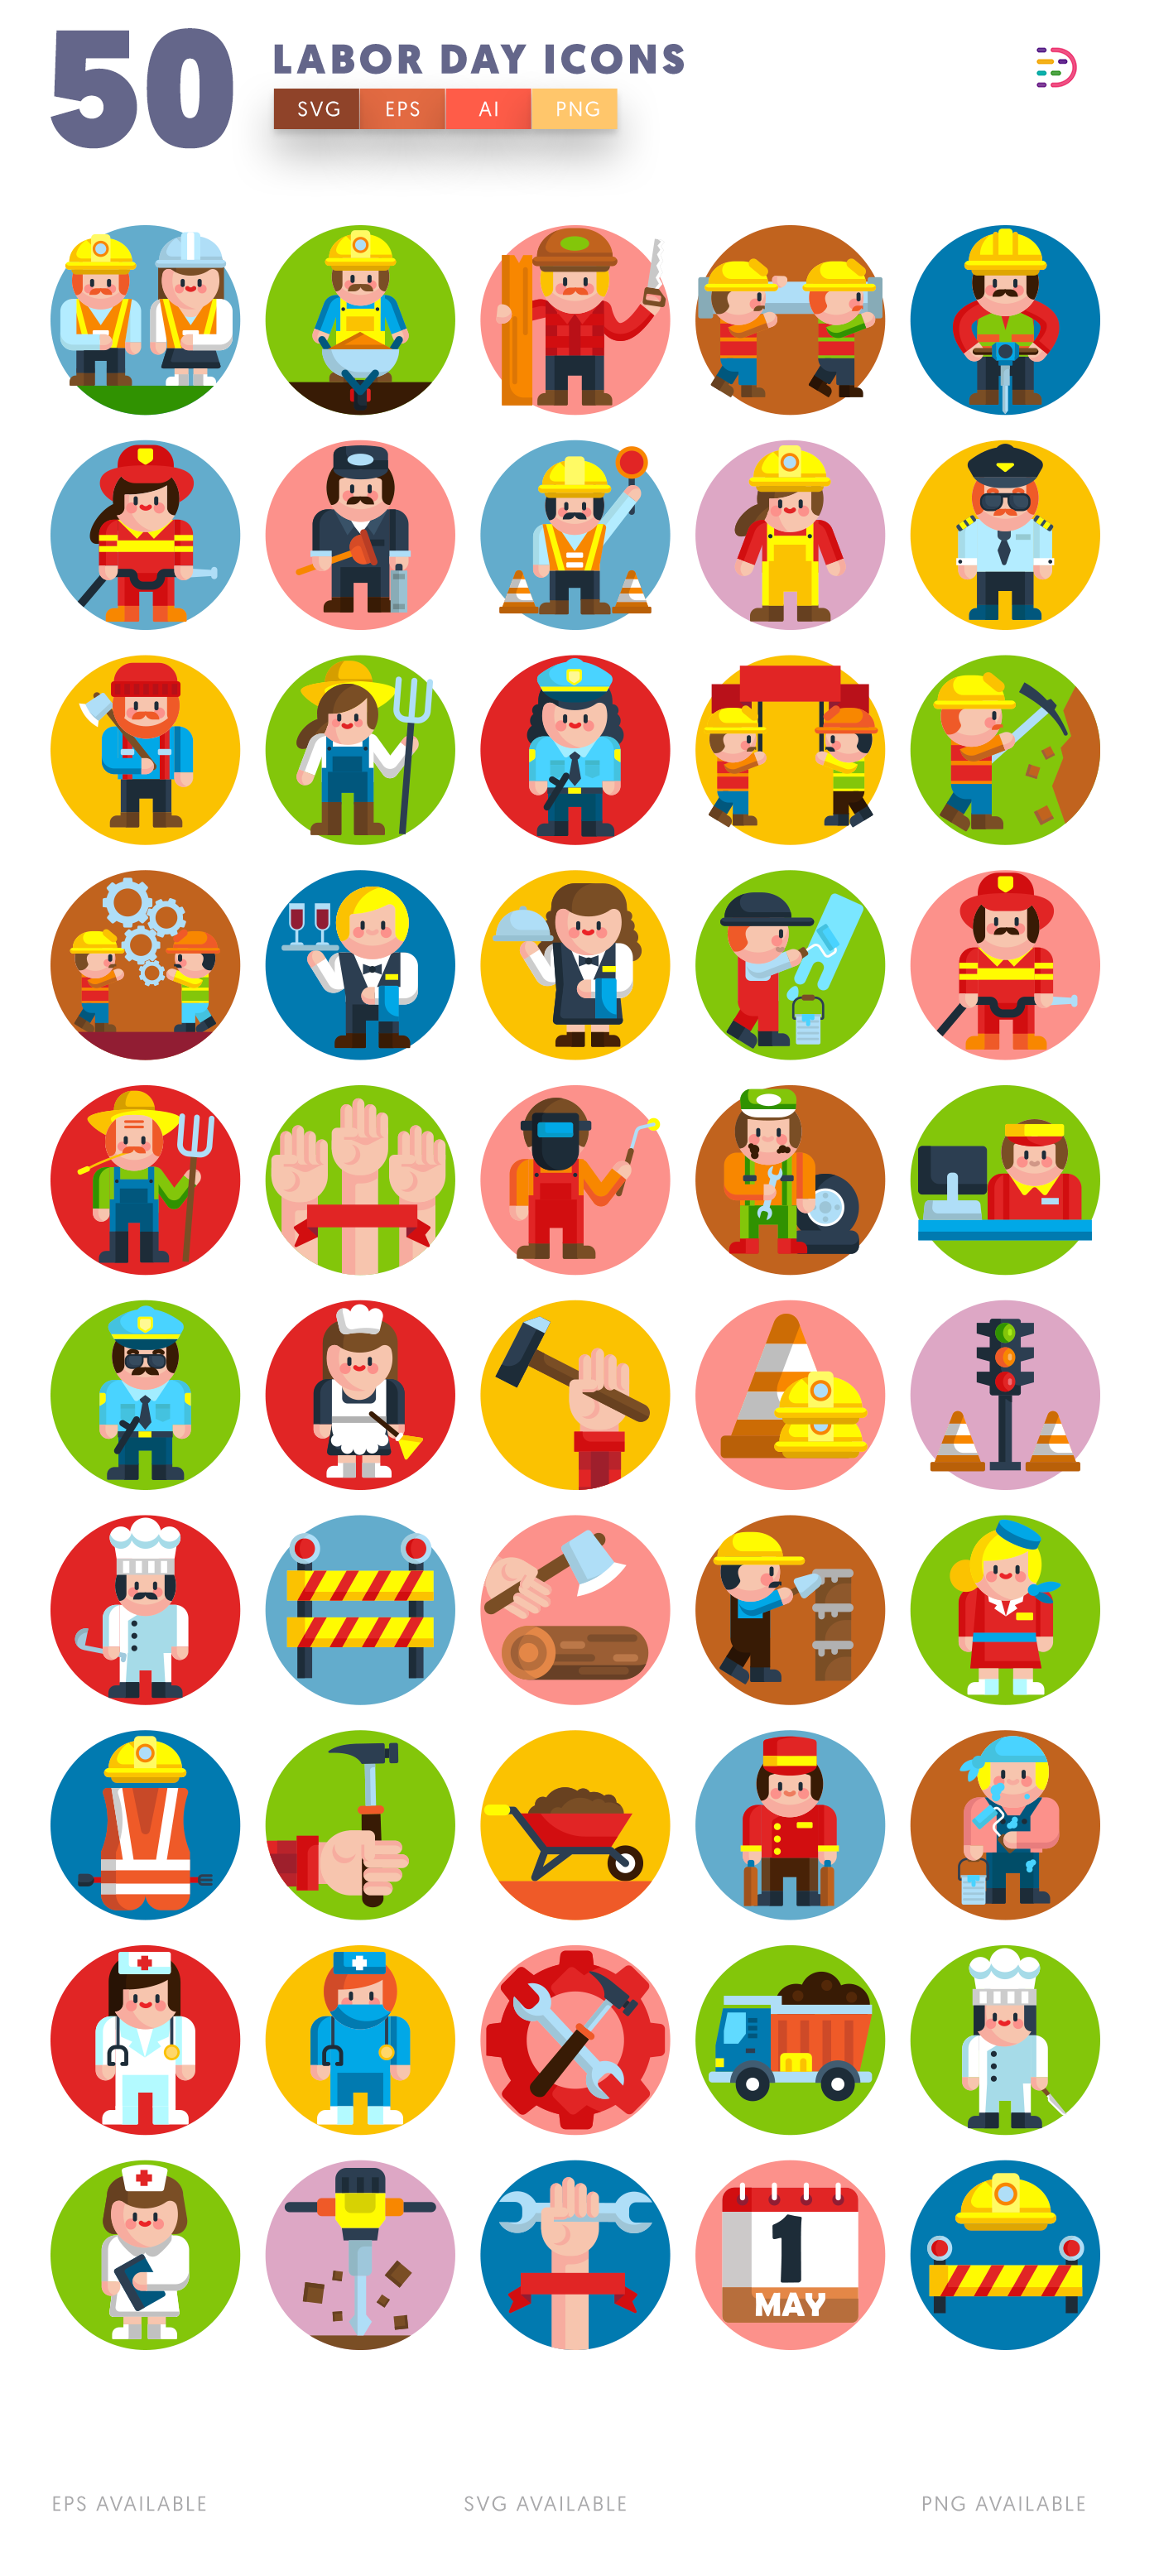 Full vector Labor Day Icons